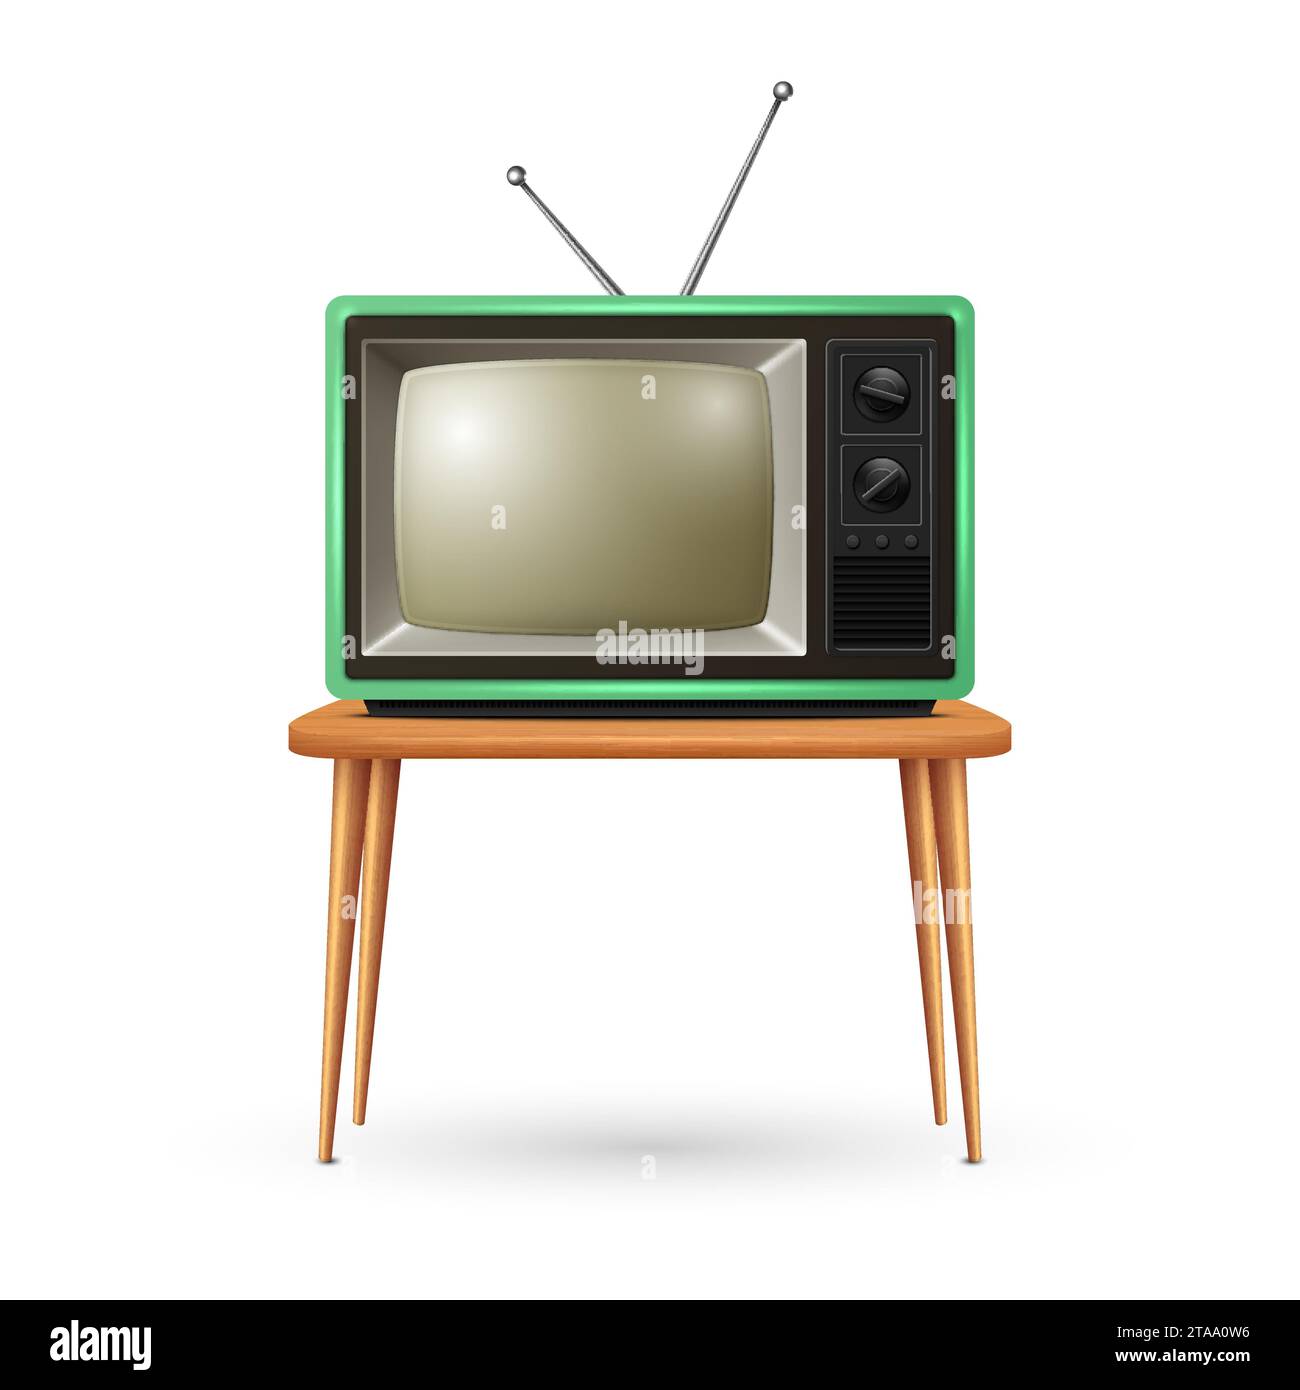 Vector Realistic Retro TV Receiver Isolated on White Background. Home Interior Design Concept. Vintage TV Set in Front View. Television Concept Stock Vector